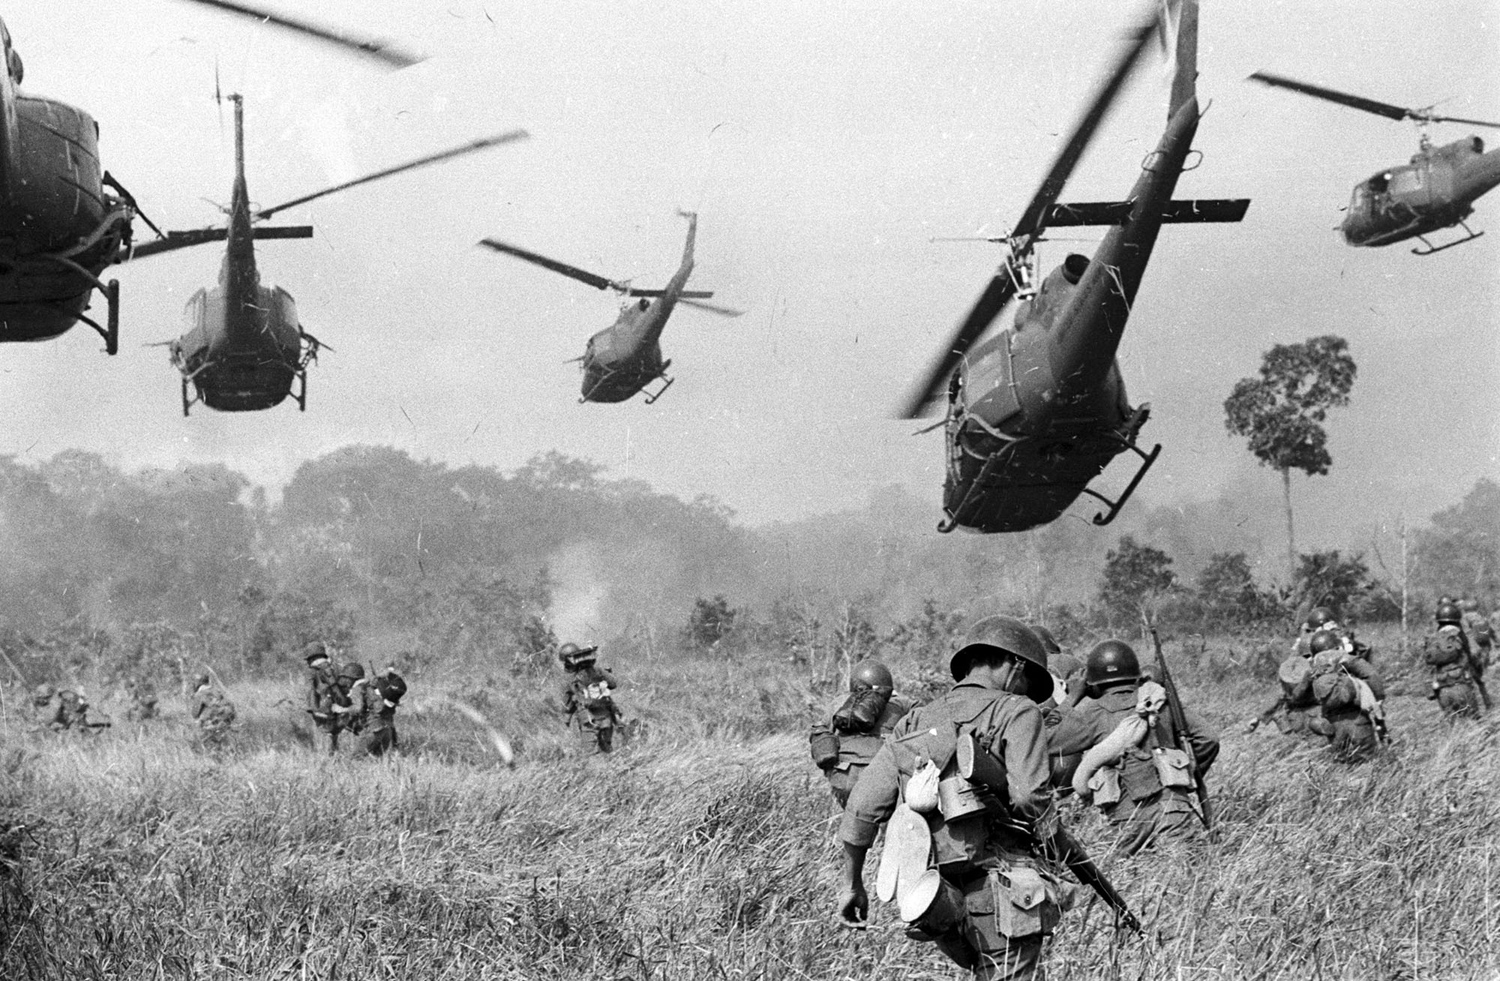 The Vietnam War, Part I: Early Years and Escalation